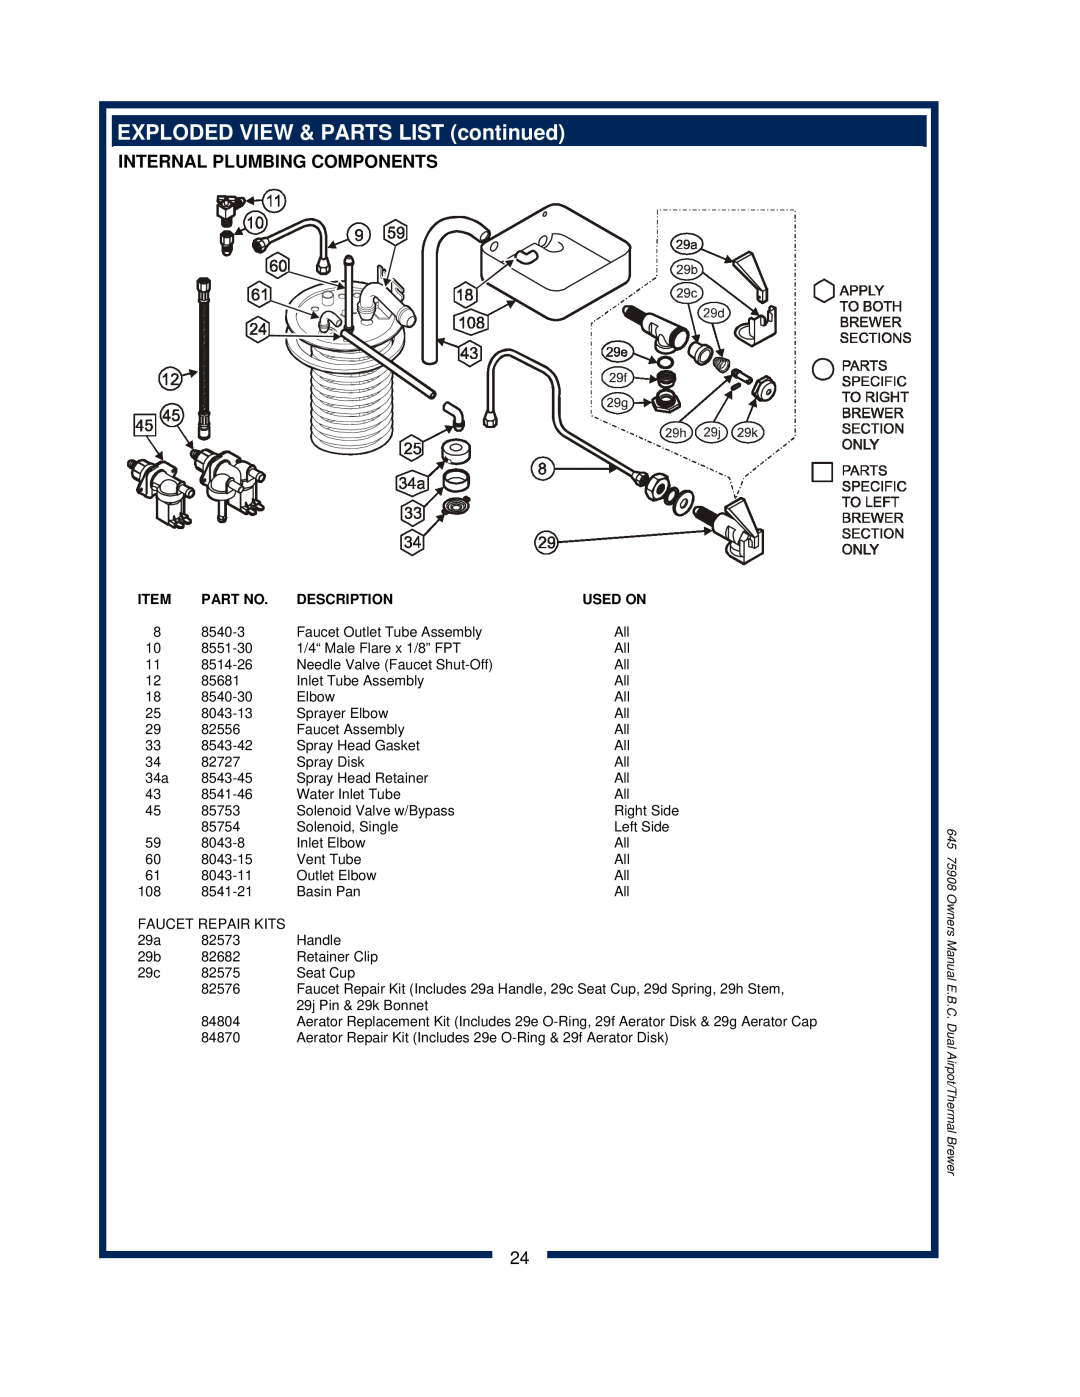 Bloomfield 1090, 1091, 1092, 1093 owner manual Internal Plumbing Components, Description, Used On 